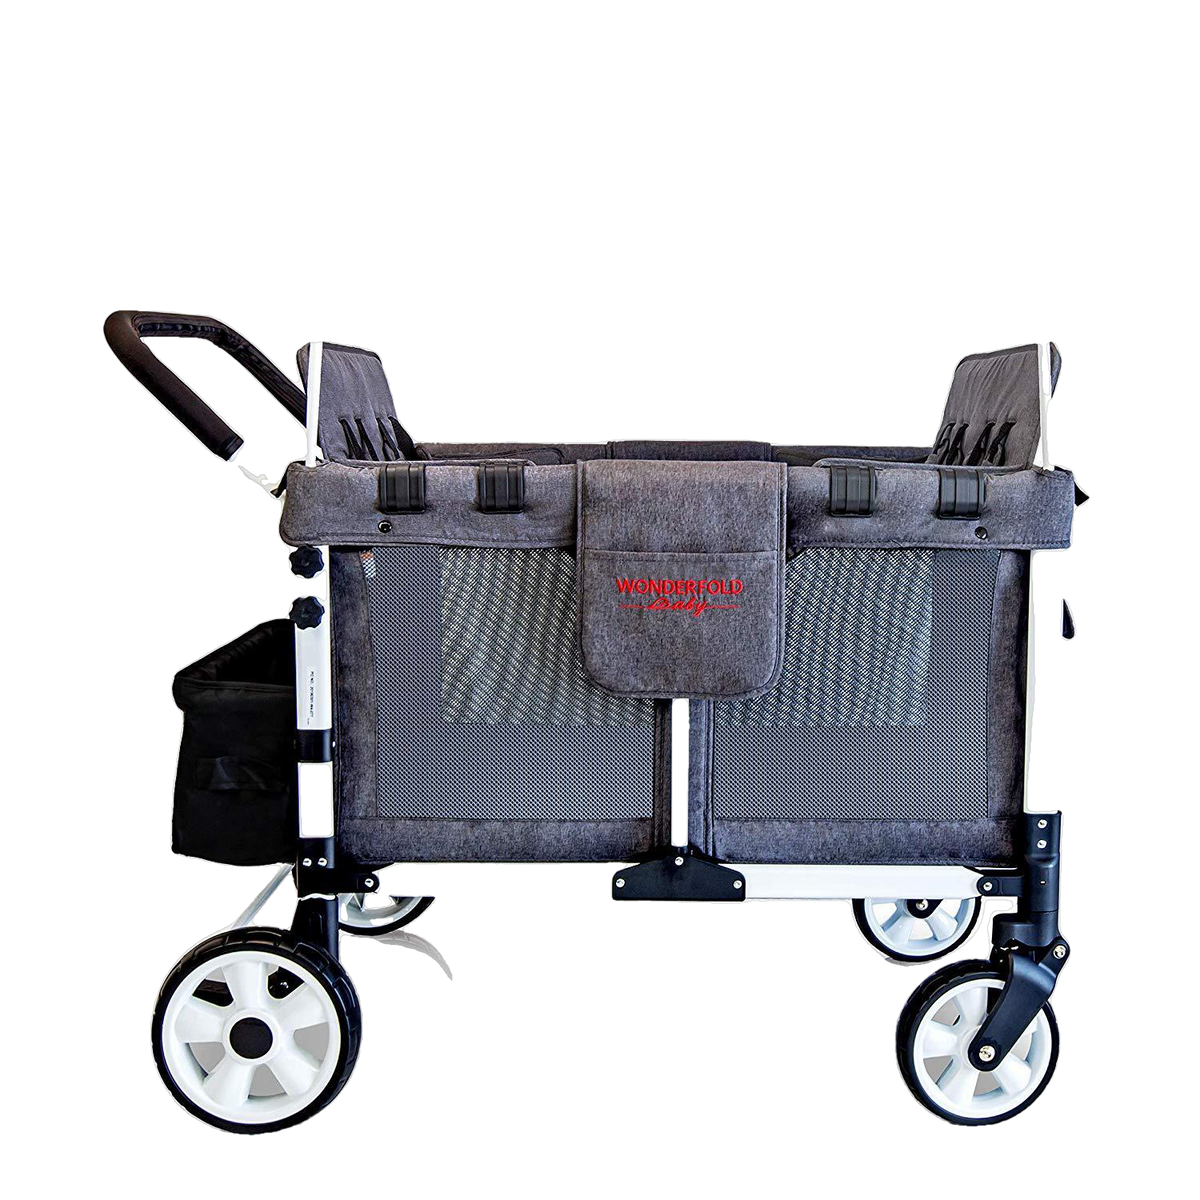 WonderFold Baby Multi-Function Folding Quad Stroller Wagon with Removable Canopy and Seats Gray Used